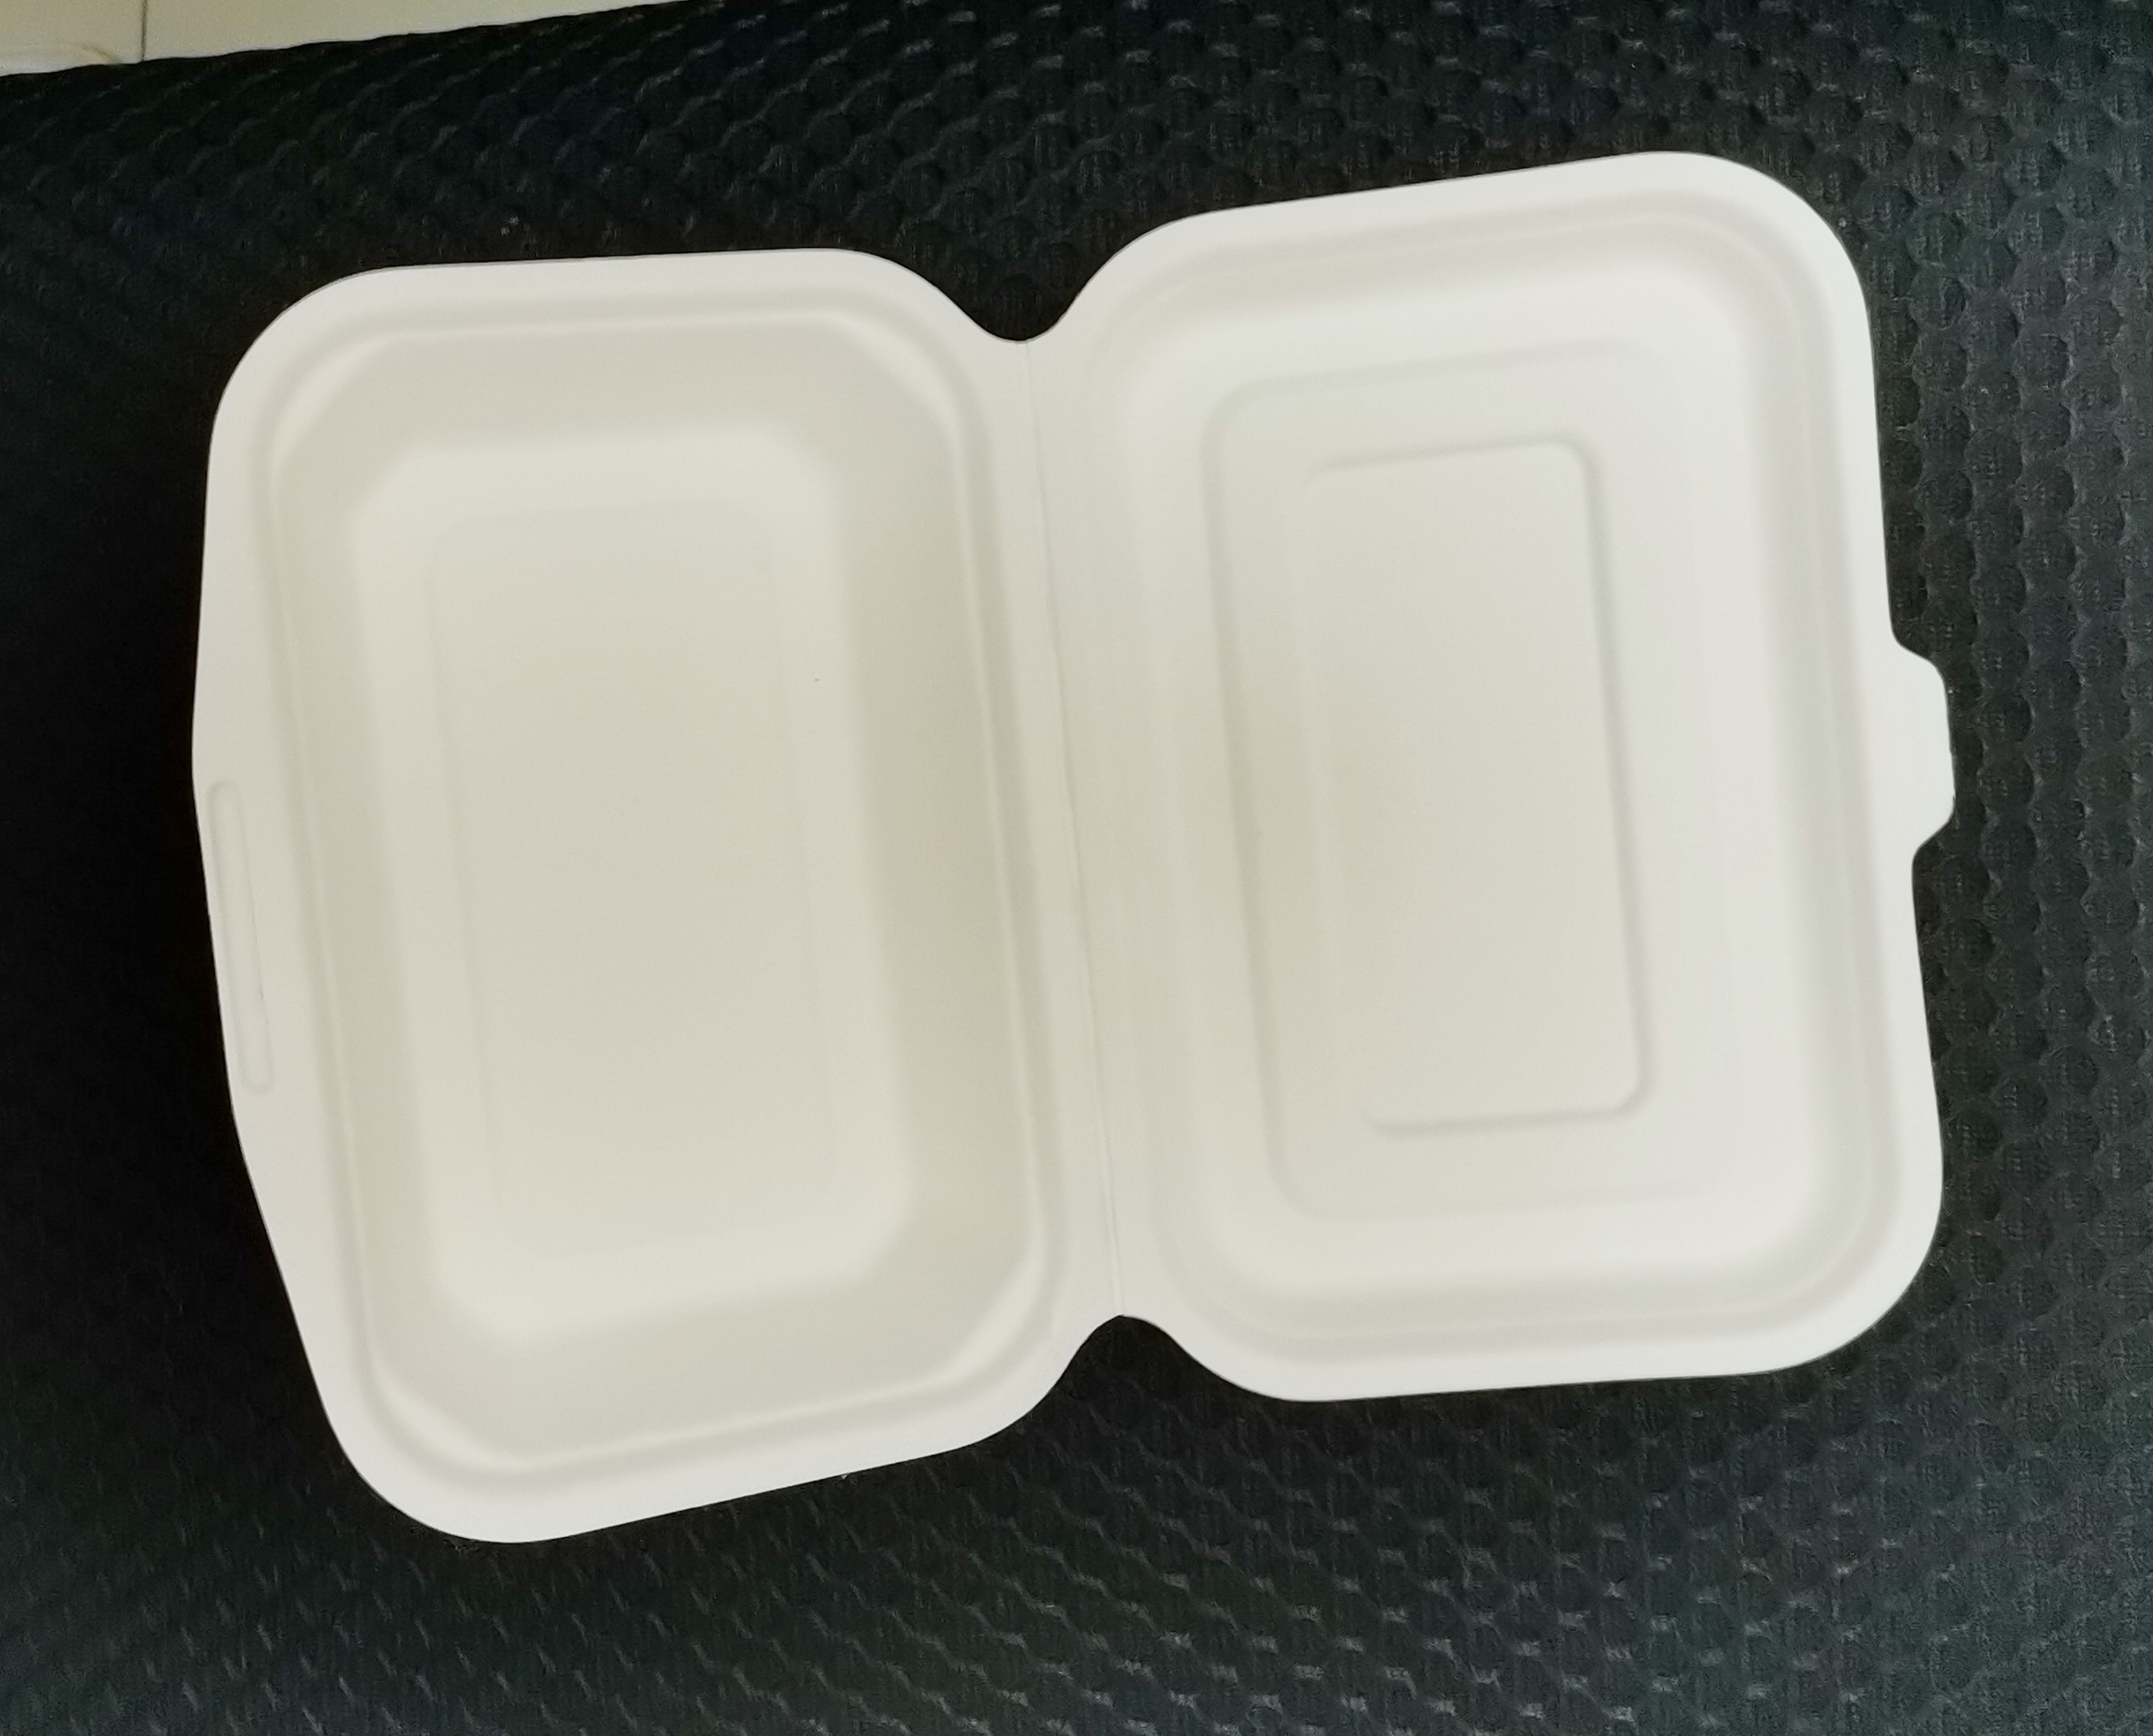 biodegradable rice clamshell